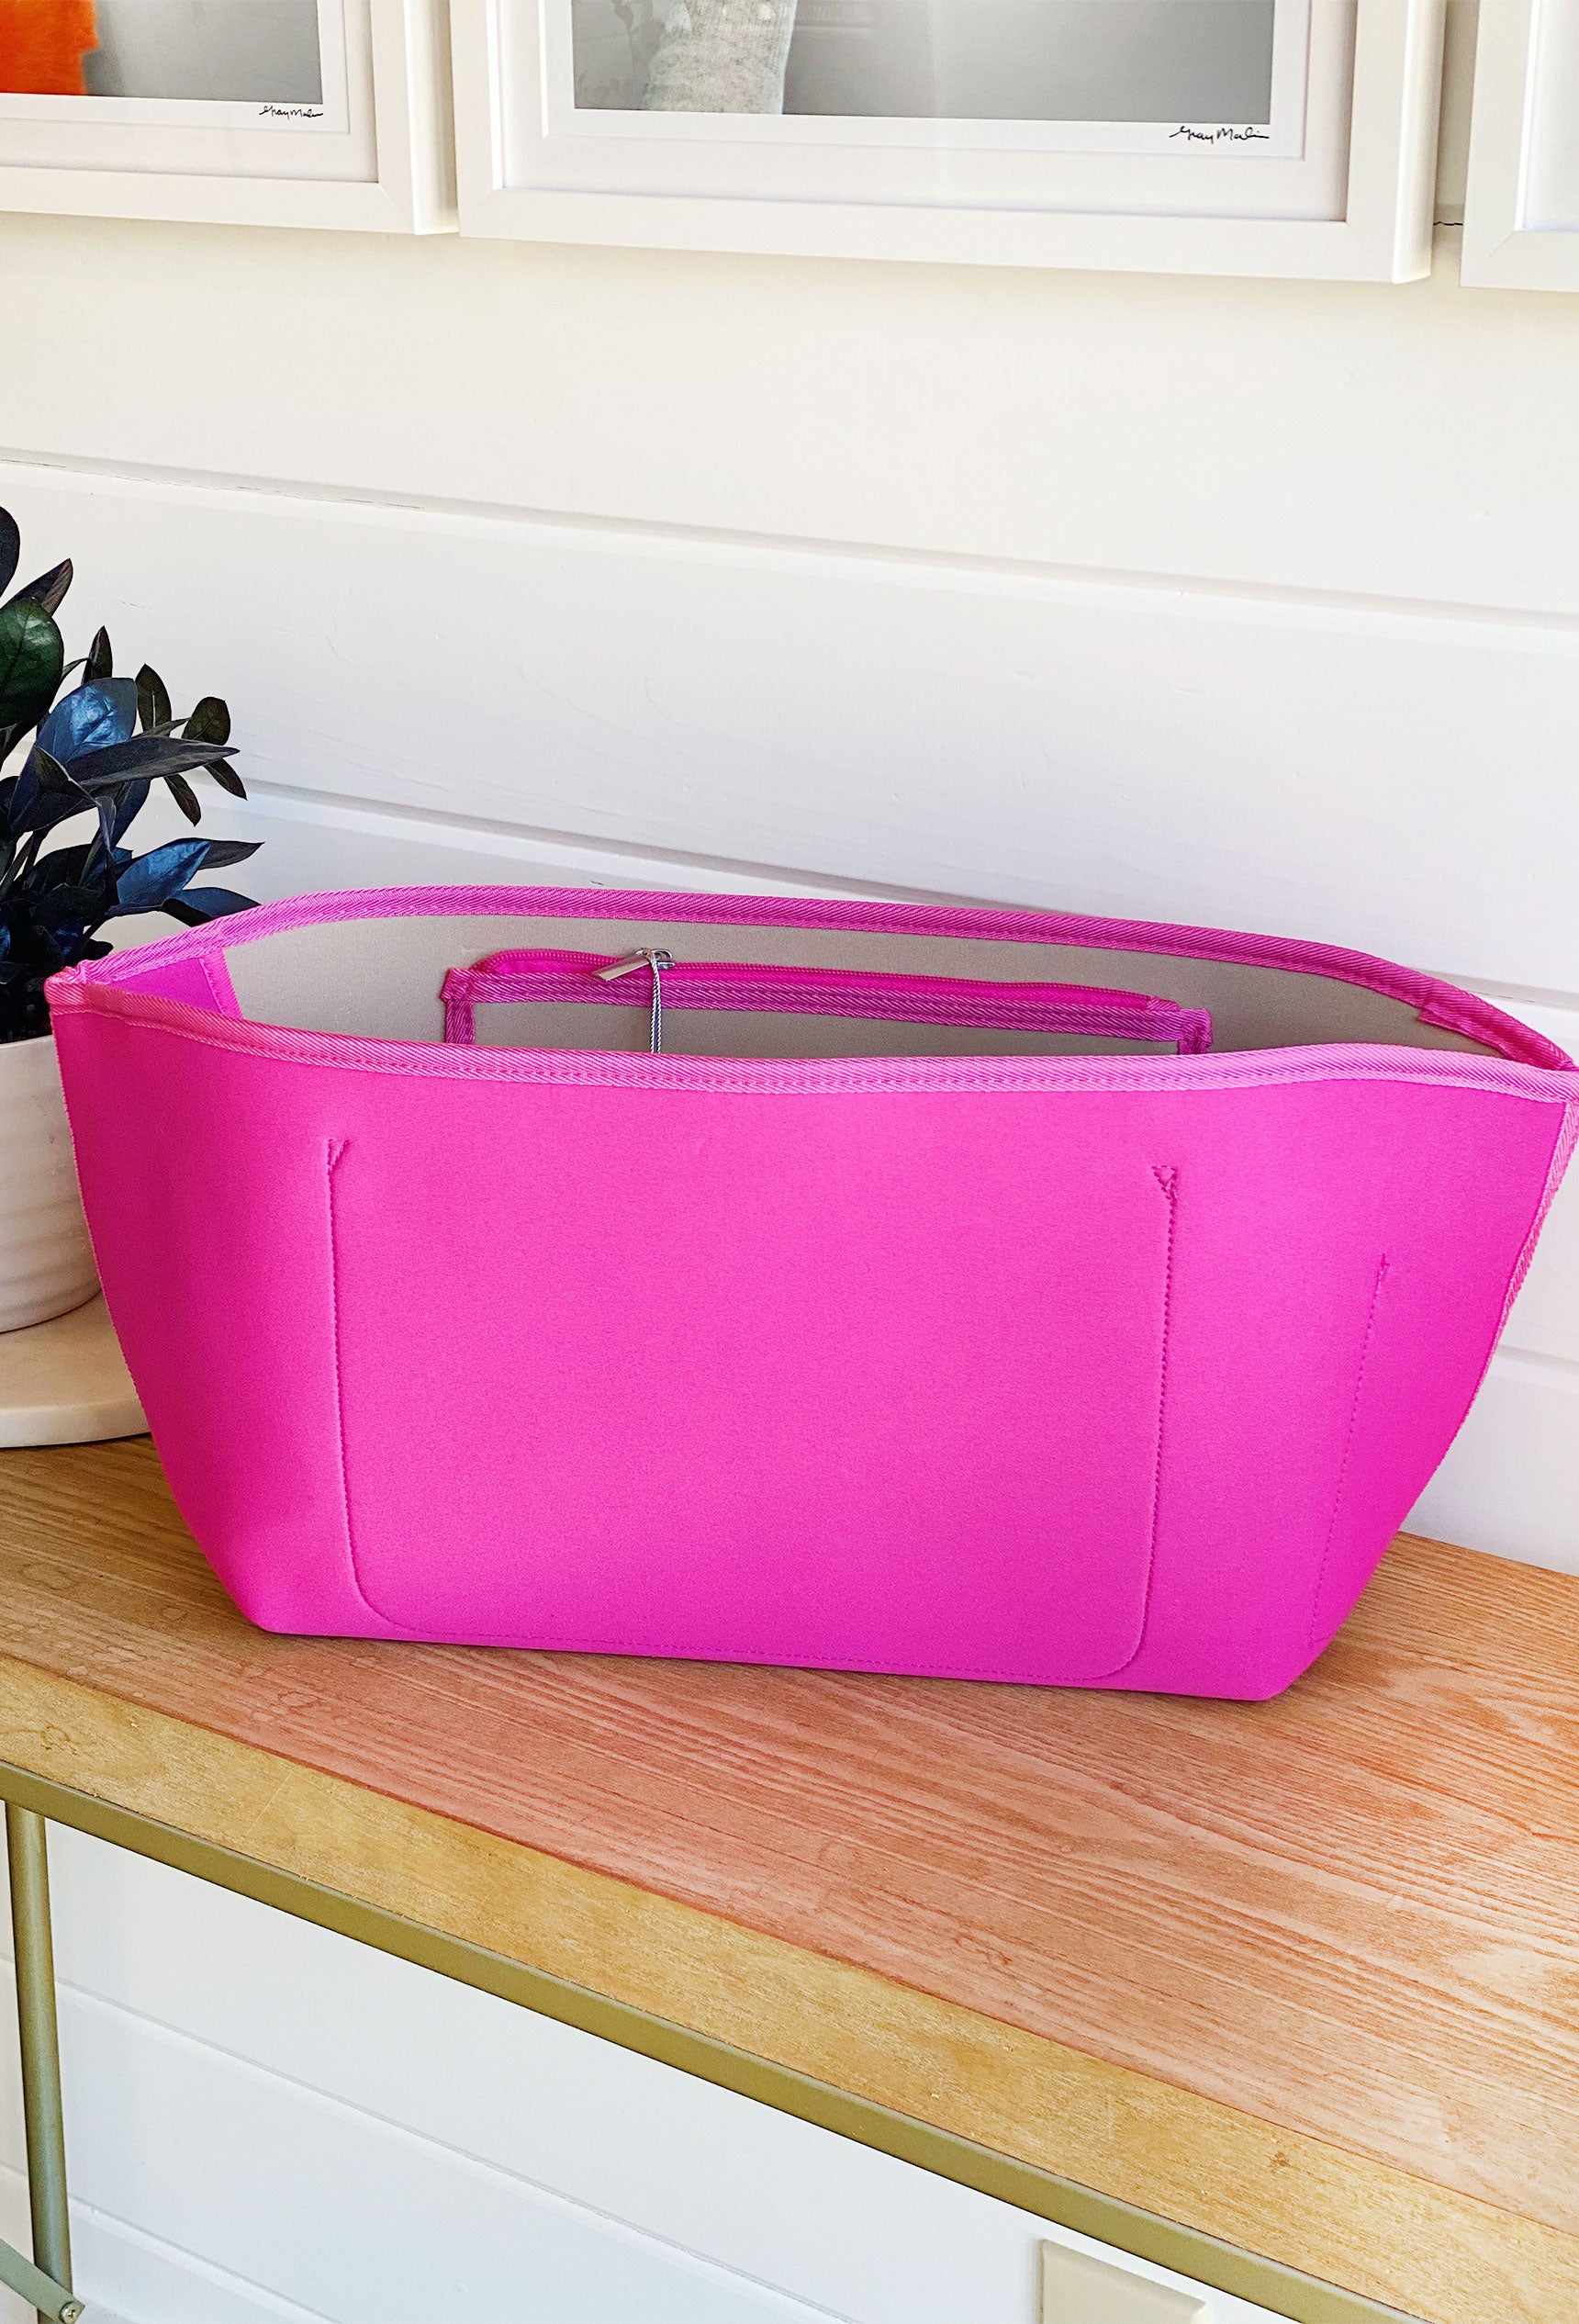 Taylor Gray Dreamy Organizer, hot pink organizer, organizer with two pockets and a zipper pouch 